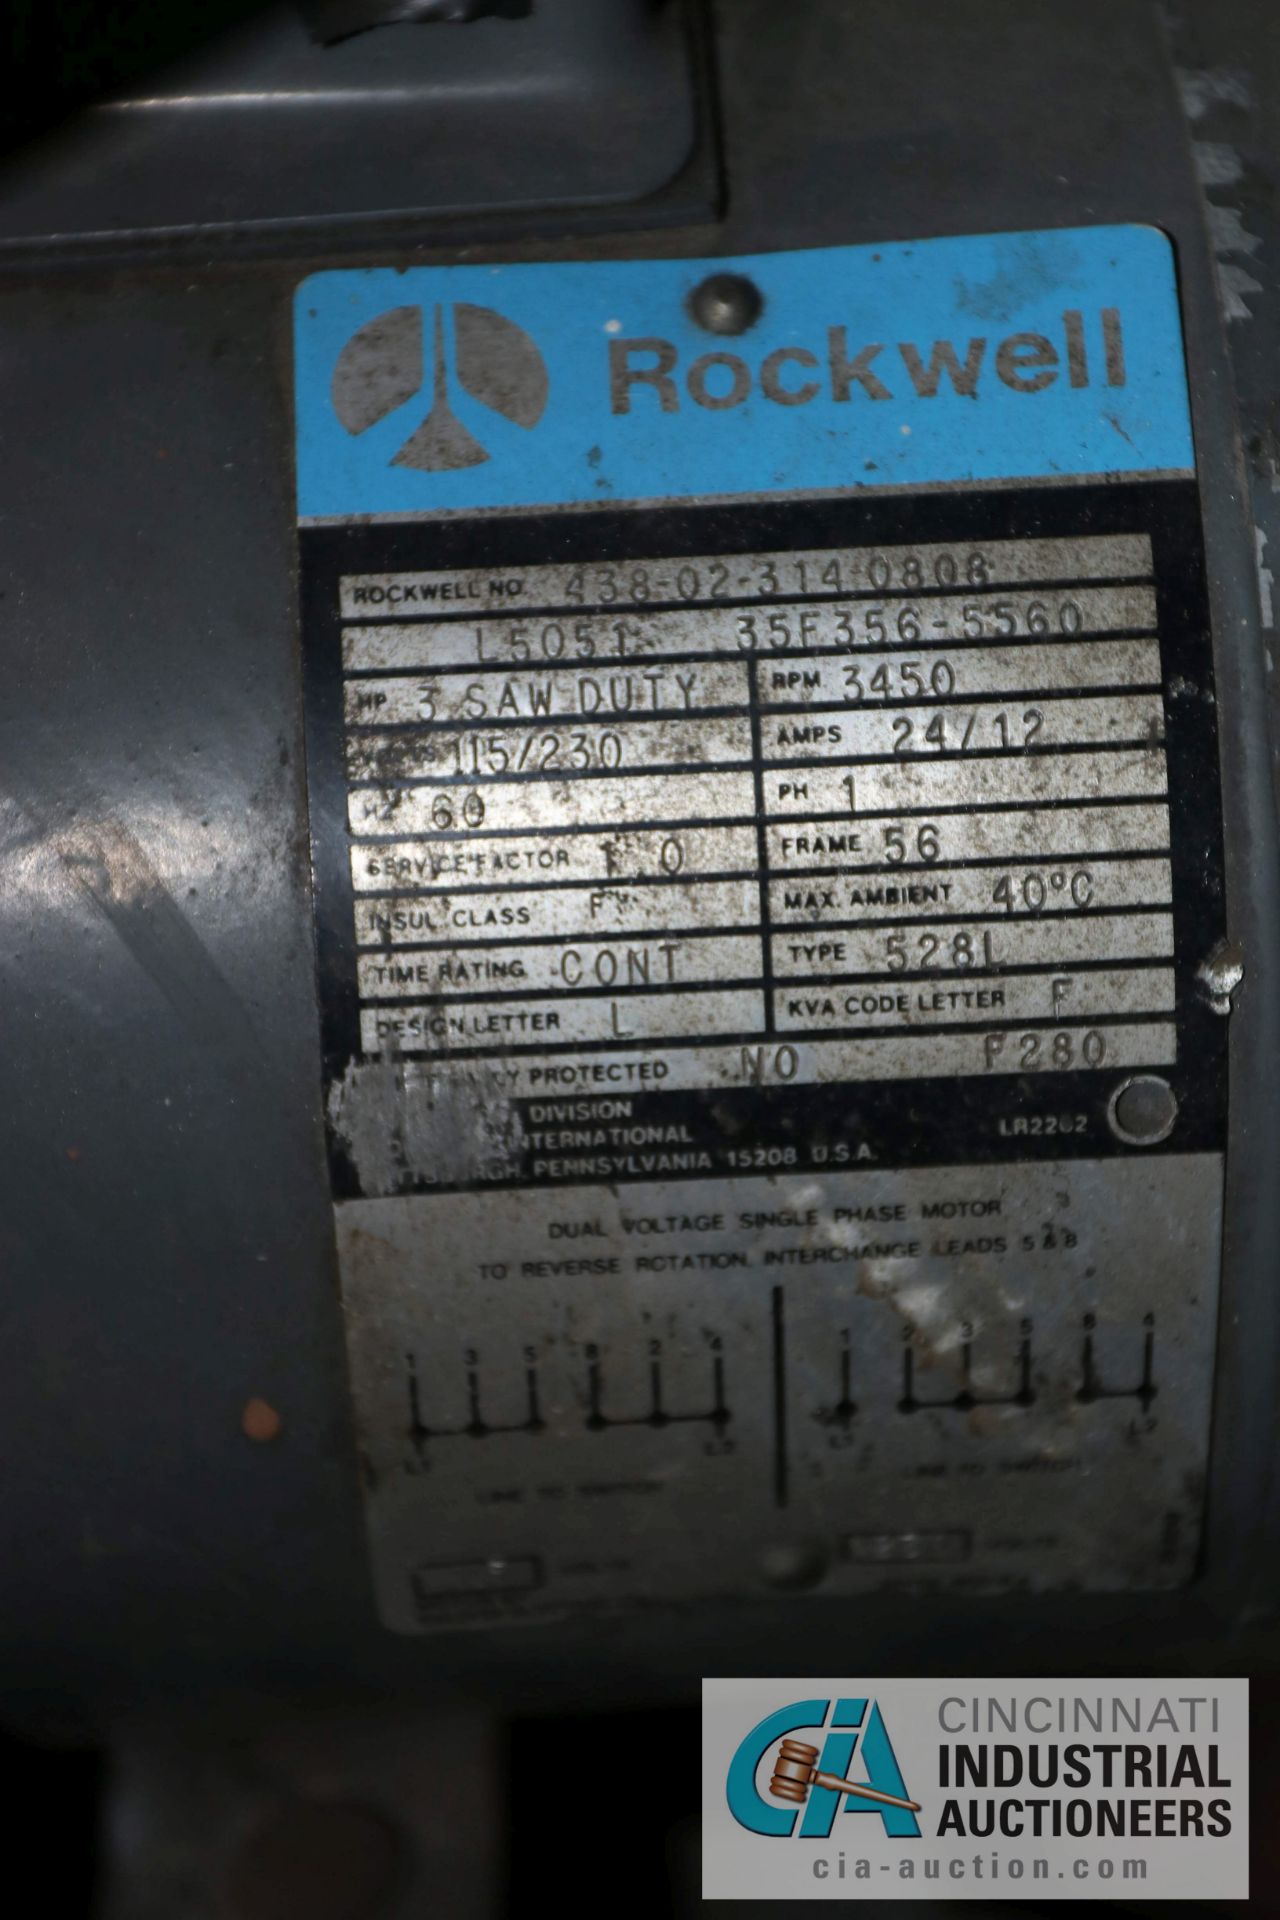 3 HP ROCKWELL MODEL 8 ABRASIVE CUTOFF SAW; S/N 438-02-3140808, SINGLE PHASE - Located in Holland, - Image 5 of 5